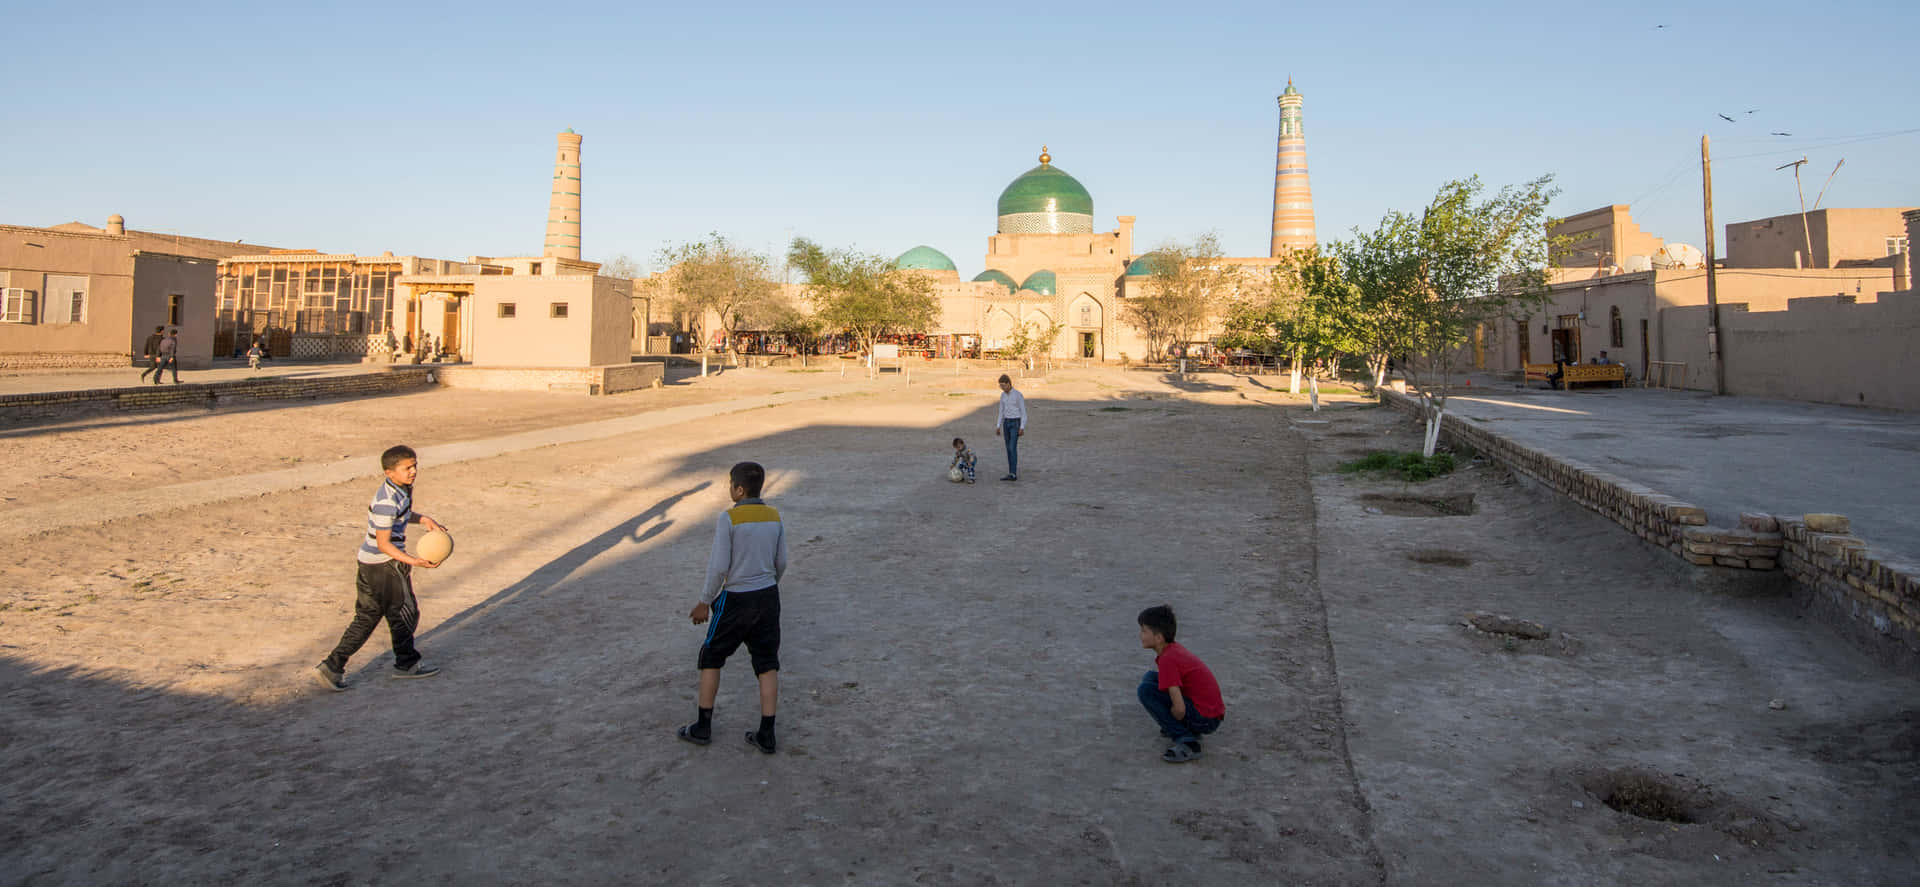 Khiva Kids Playing Picture